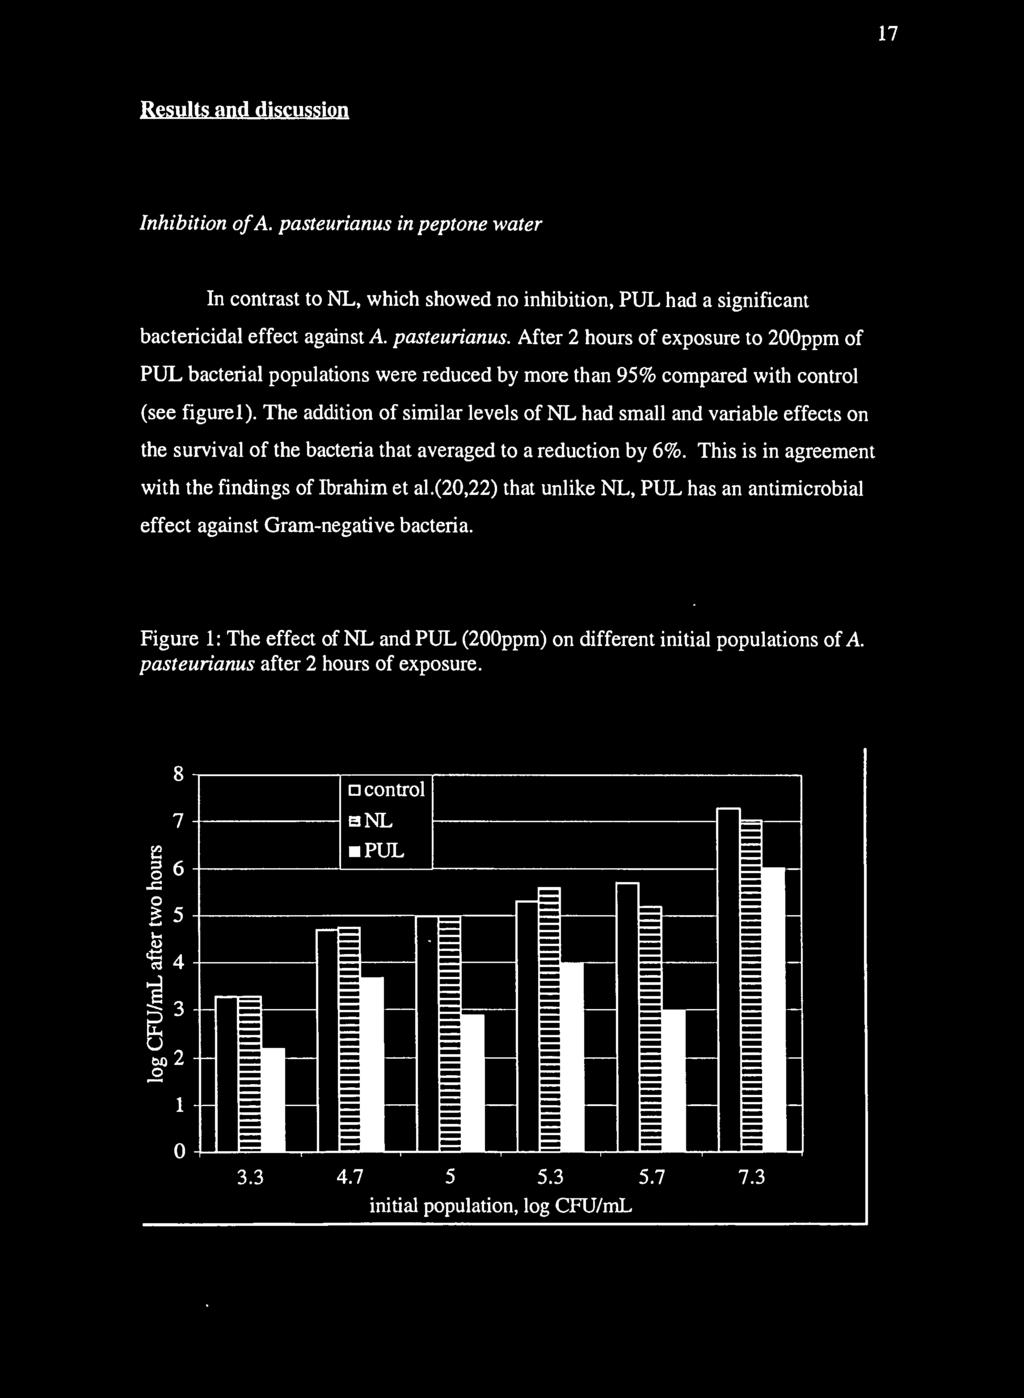 (20,22) that unlike NL, PUL has an antimicrobial effect against Gram-negative bacteria. Figure 1: The effect of NL and PUL (200ppm) on different initial populations of A.